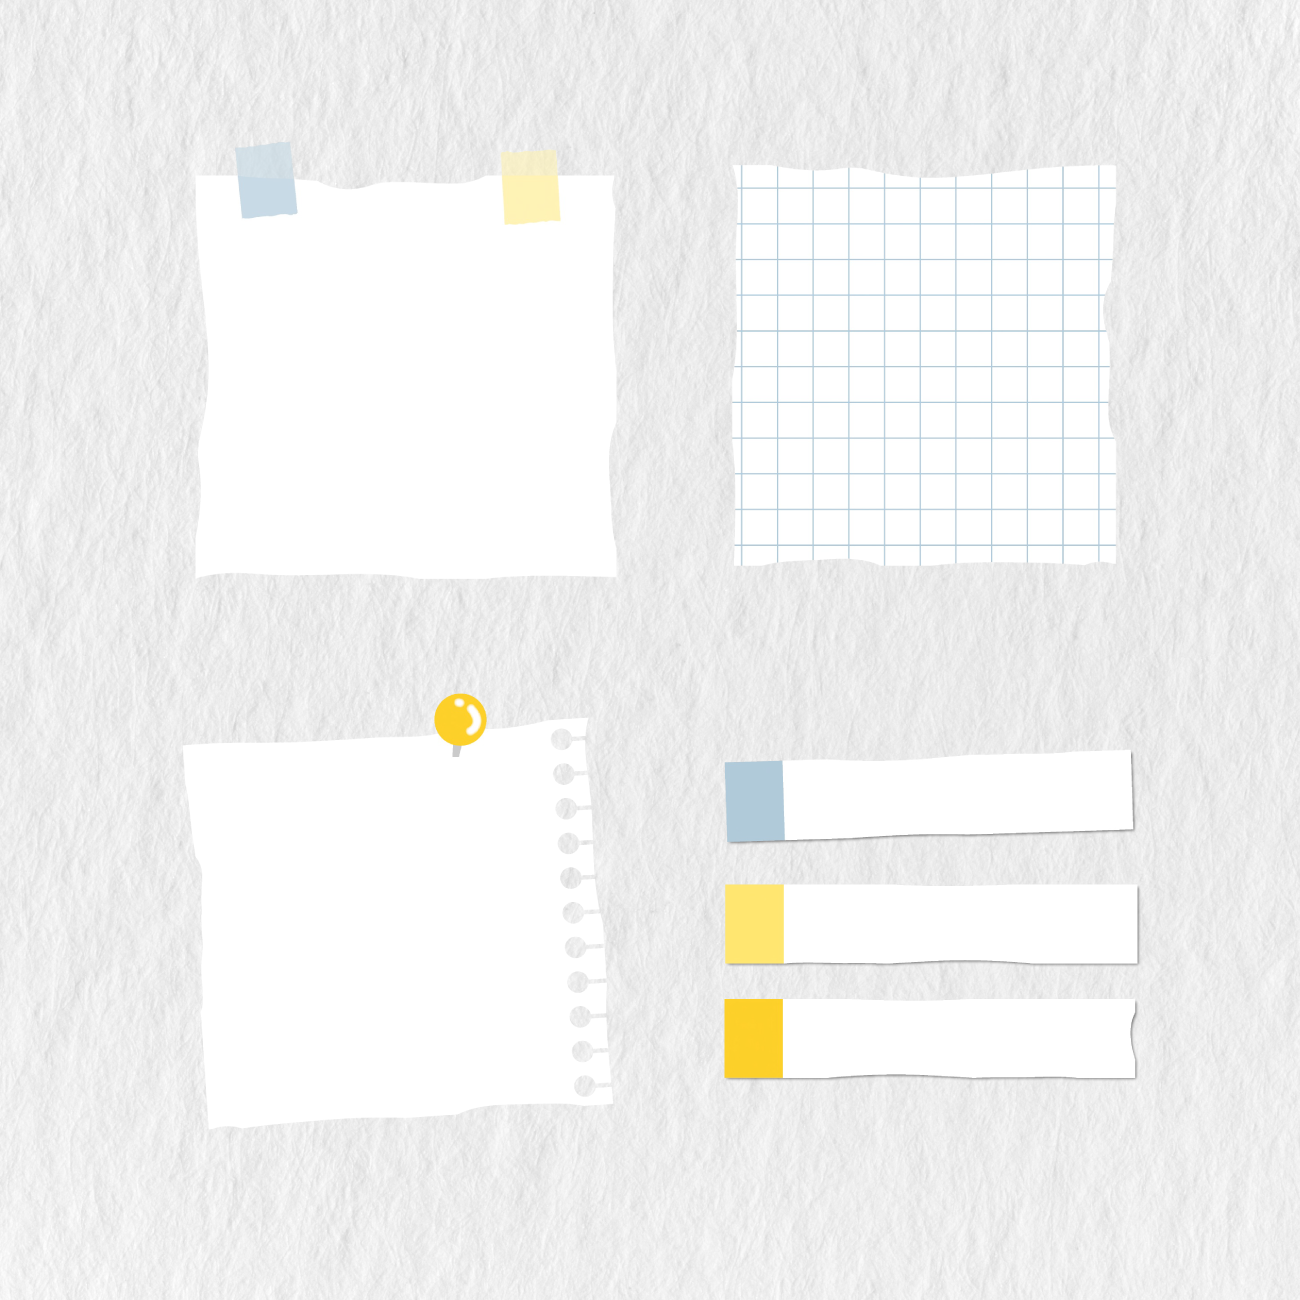 How to make transparent sticky notes in Goodnotes. Select the pen